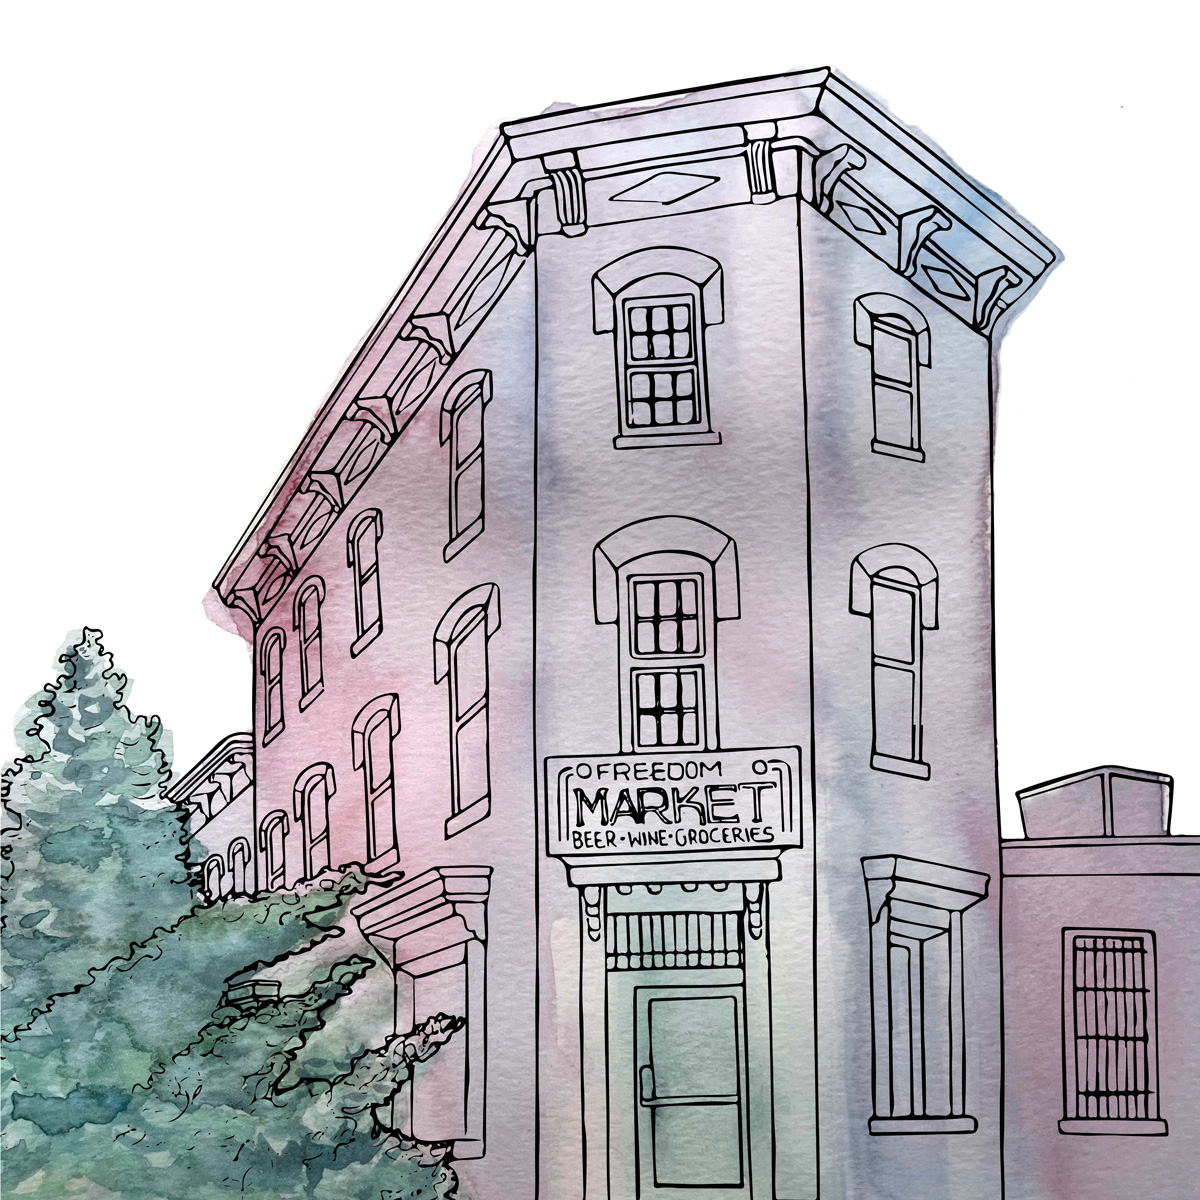 Watercolor illustration of a building